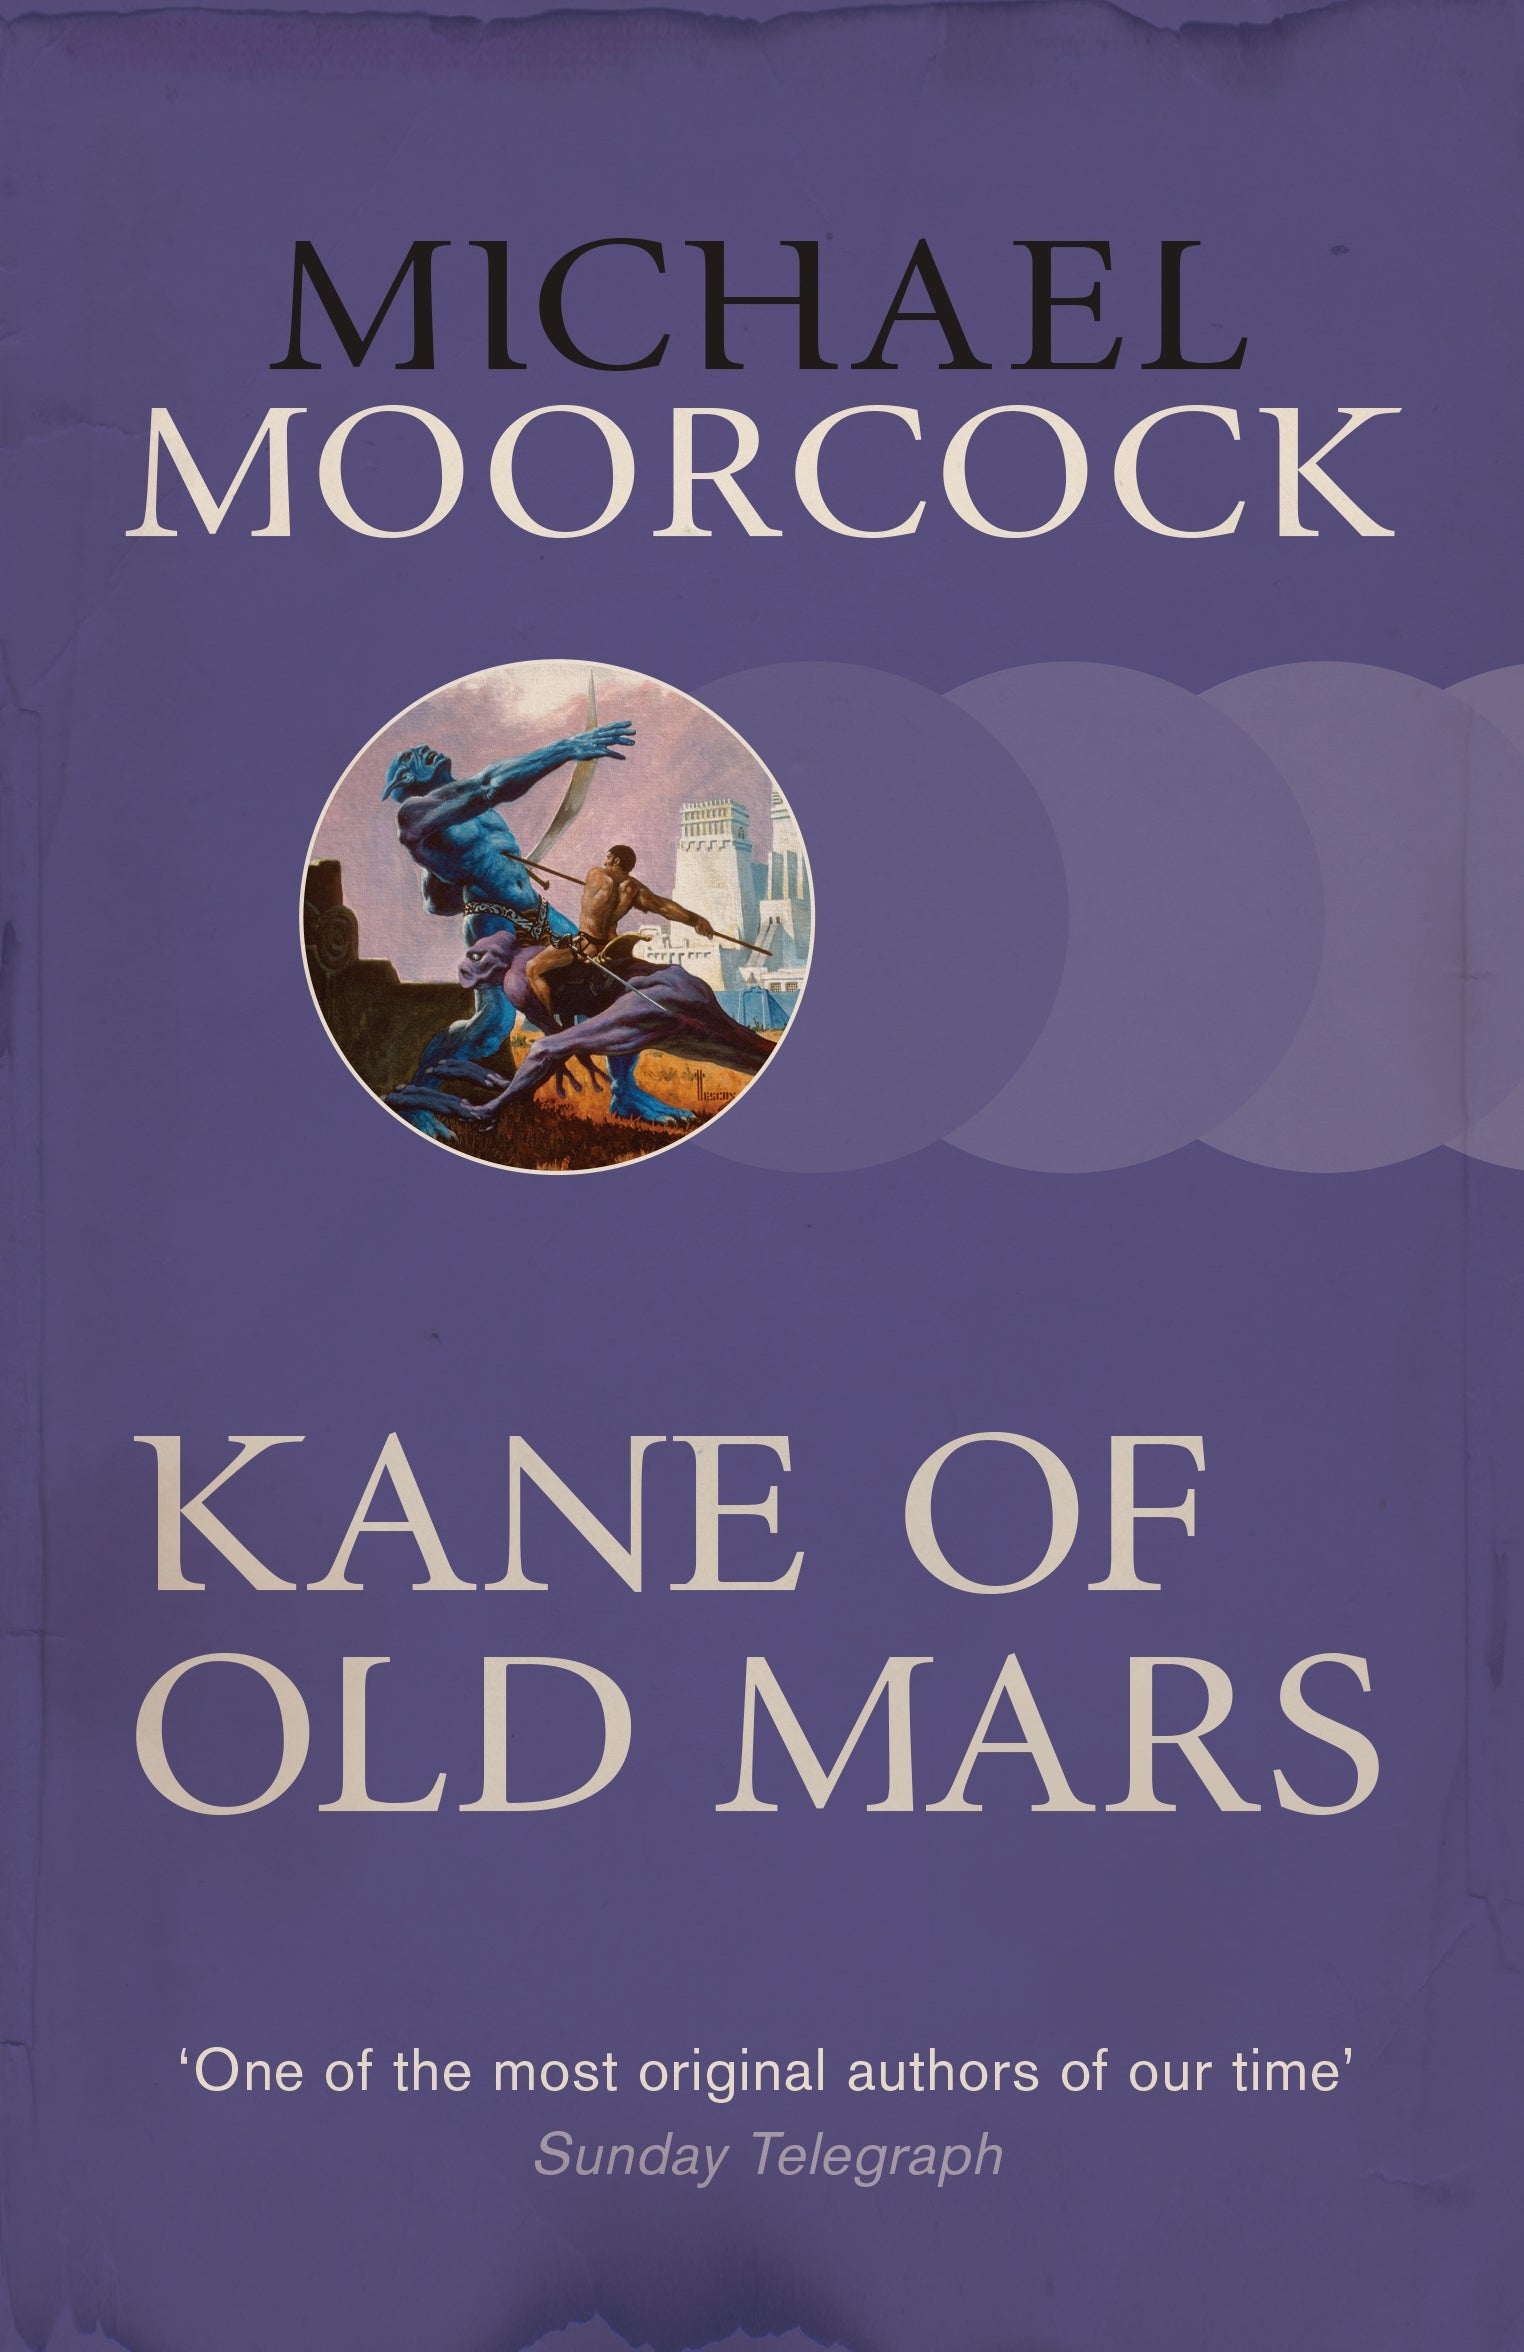 Kane of Old Mars by Michael Moorcock